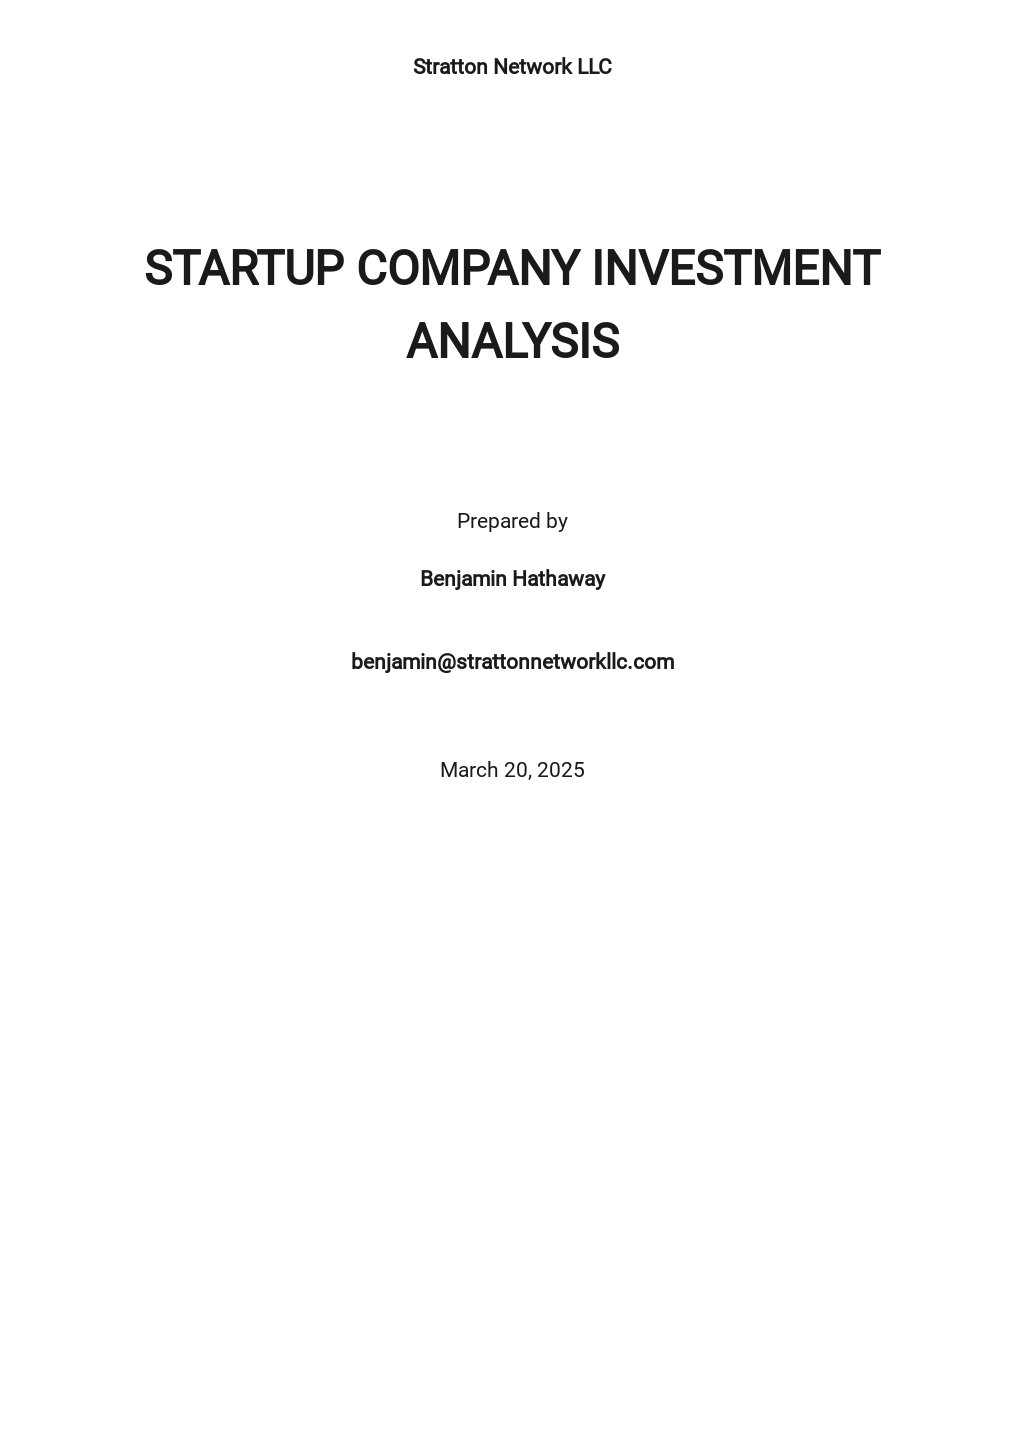 Startup Investment Analysis Template.jpe